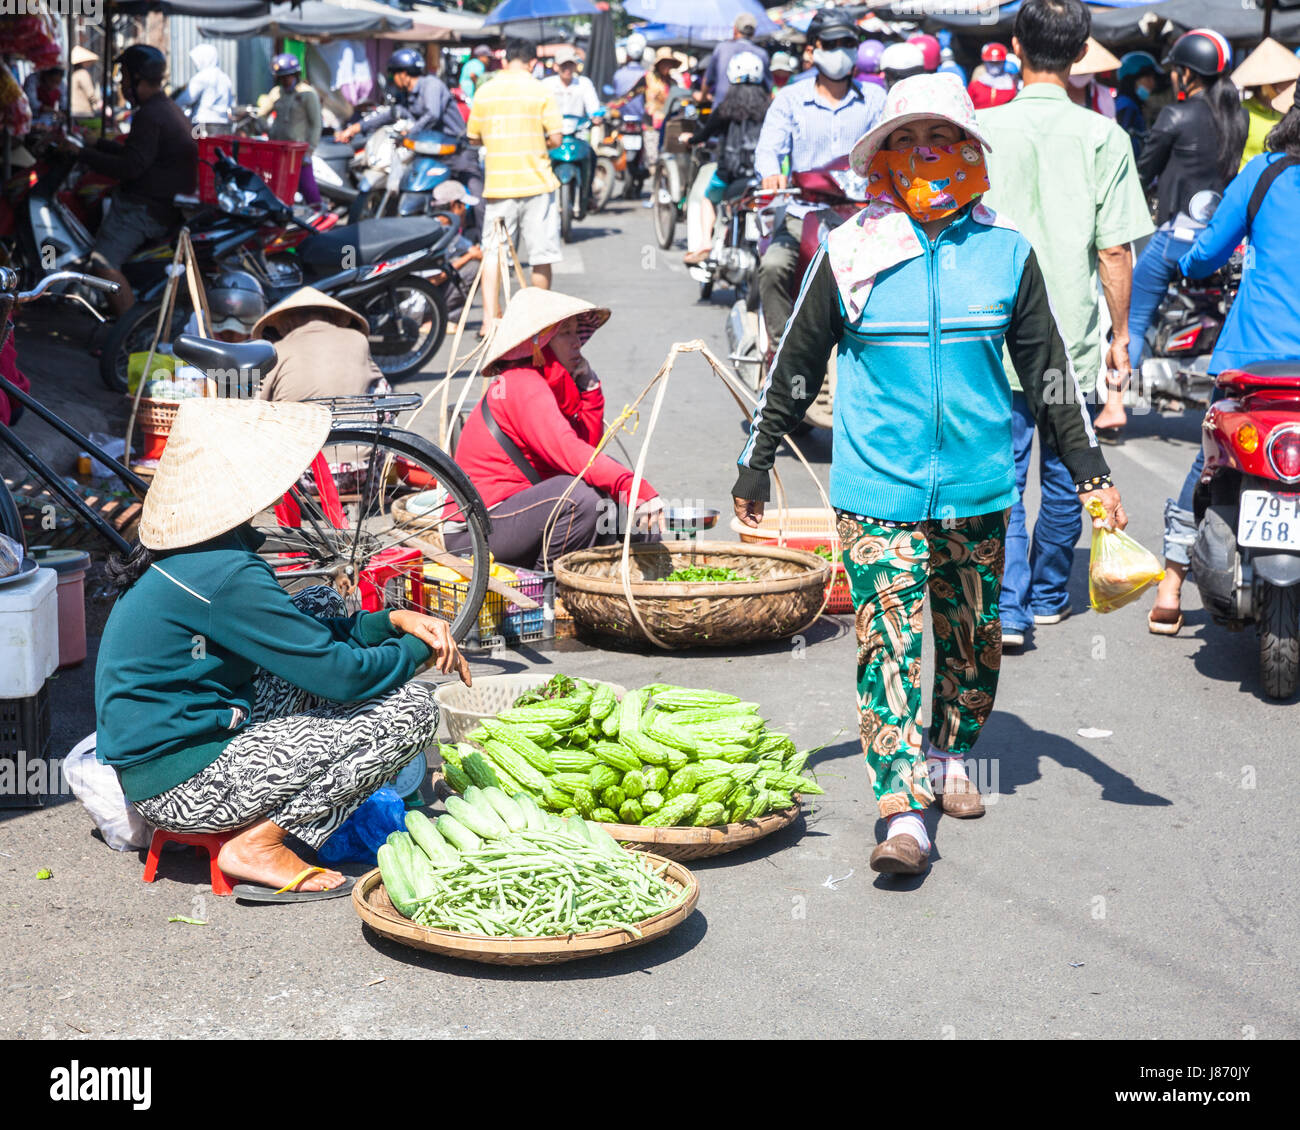 NHA TRANG, VIETNAM - JANUARY 20: Women are selling greens at the crowded market street on January 20, 2016 in Nha Trang, Vietnam. Stock Photo